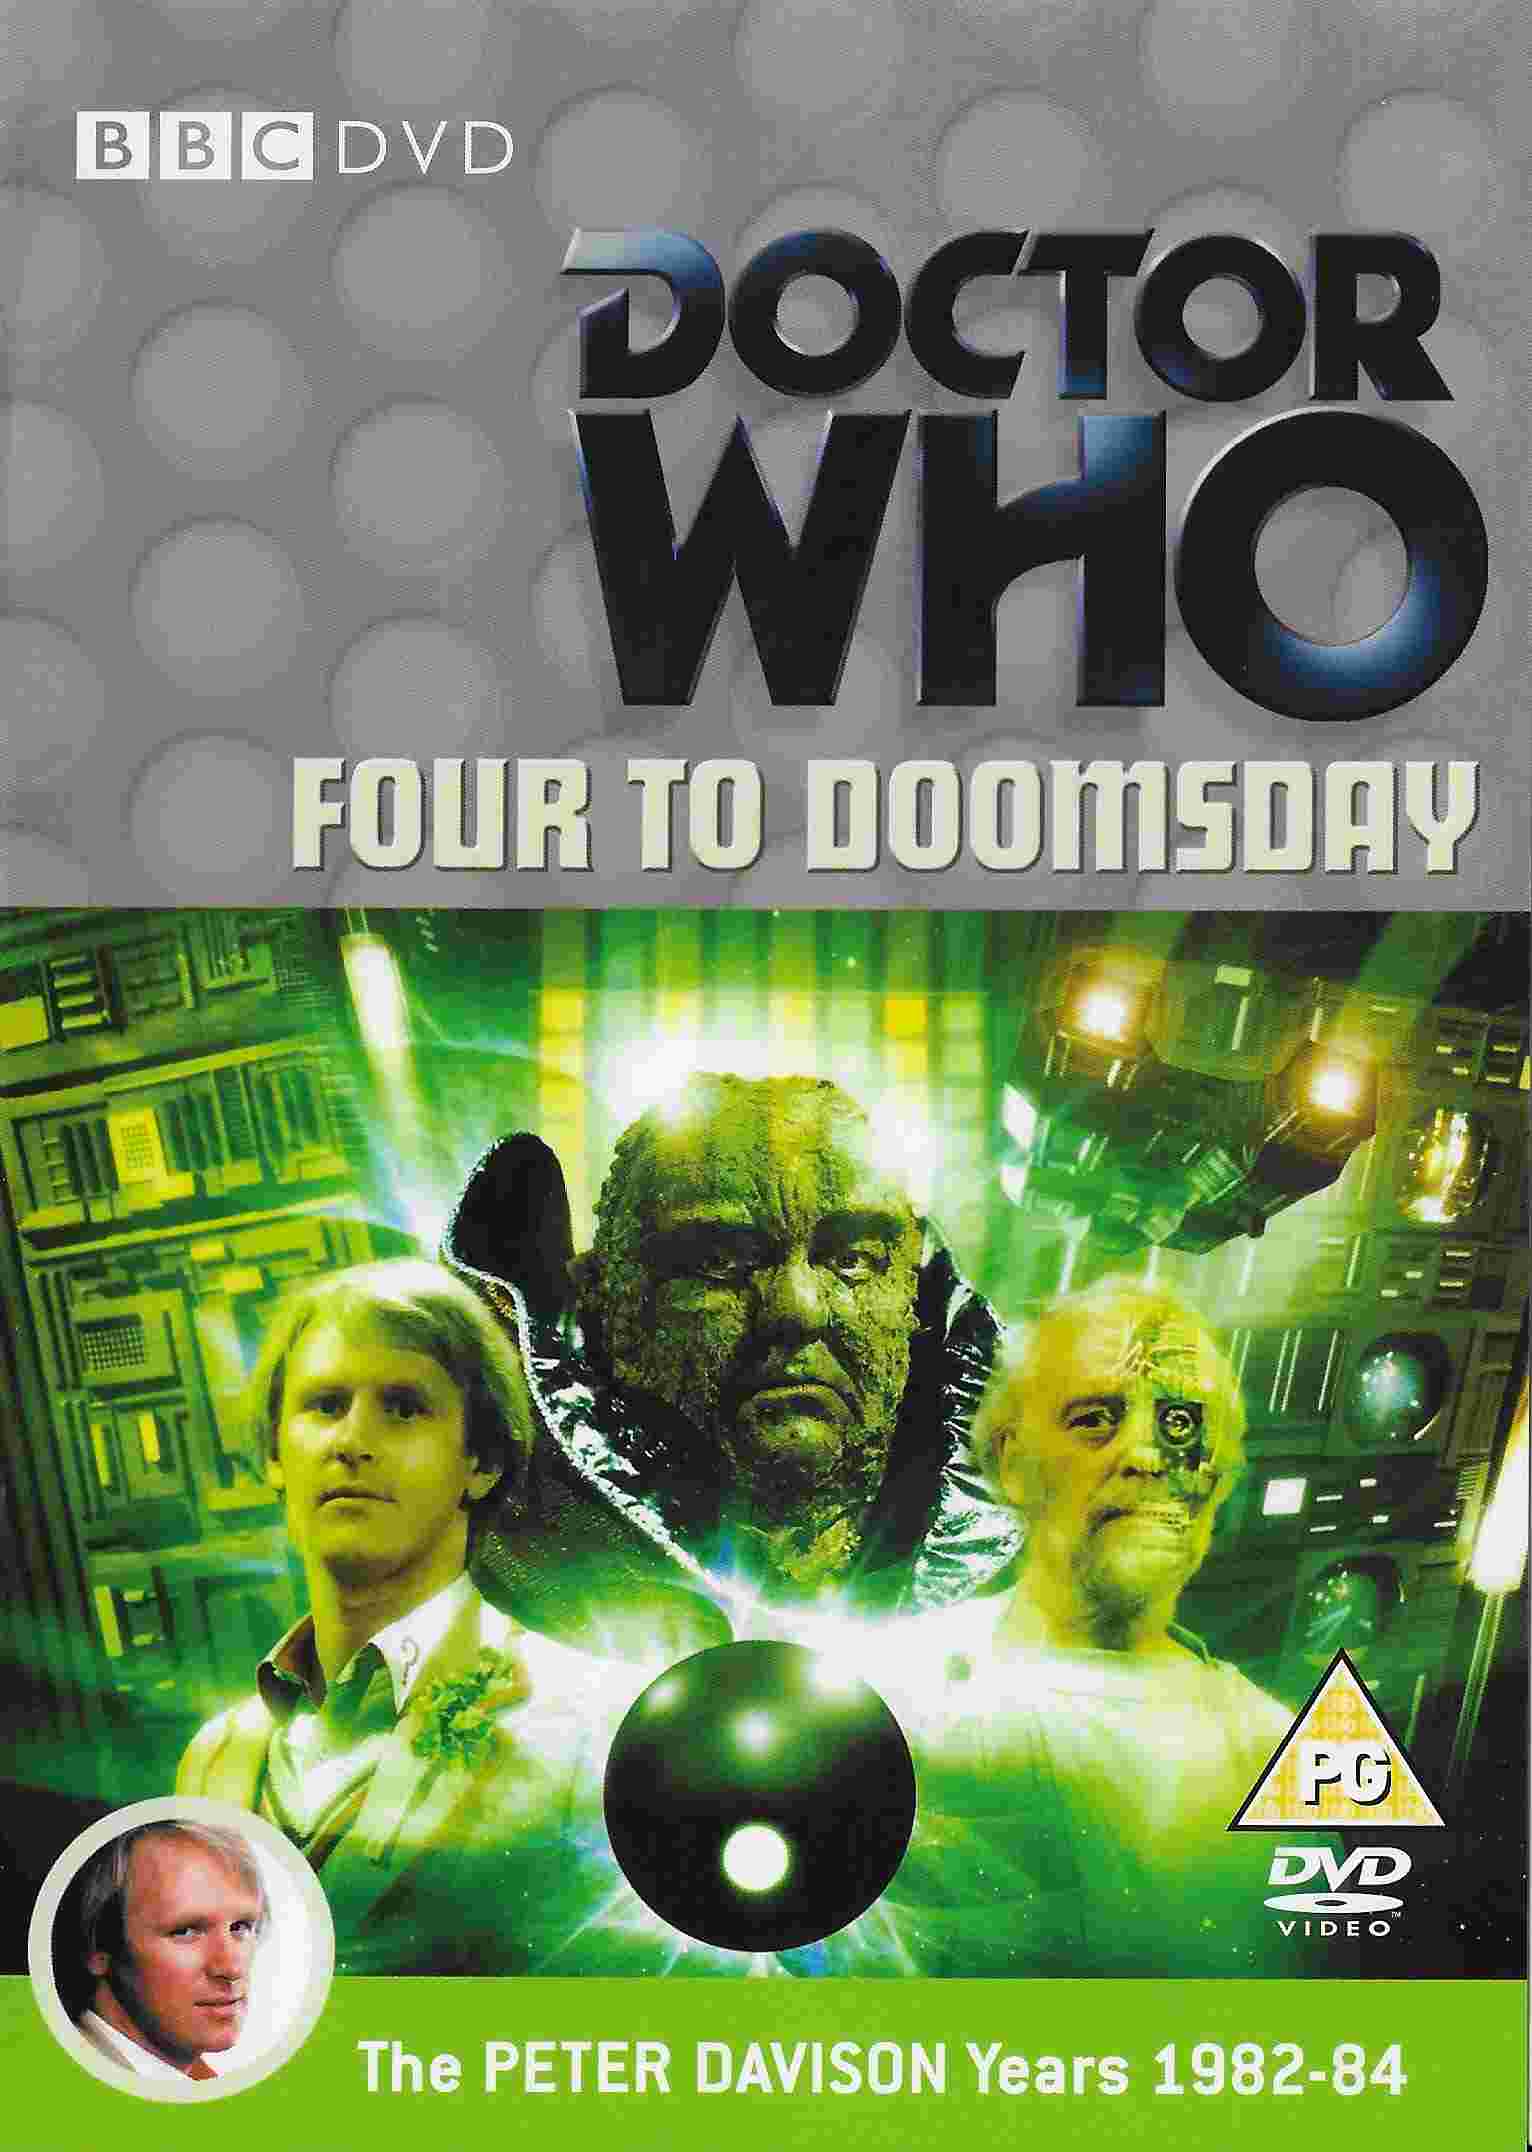 Picture of BBCDVD 2431 Doctor Who - Four to doomsday by artist Terence Dudley from the BBC dvds - Records and Tapes library